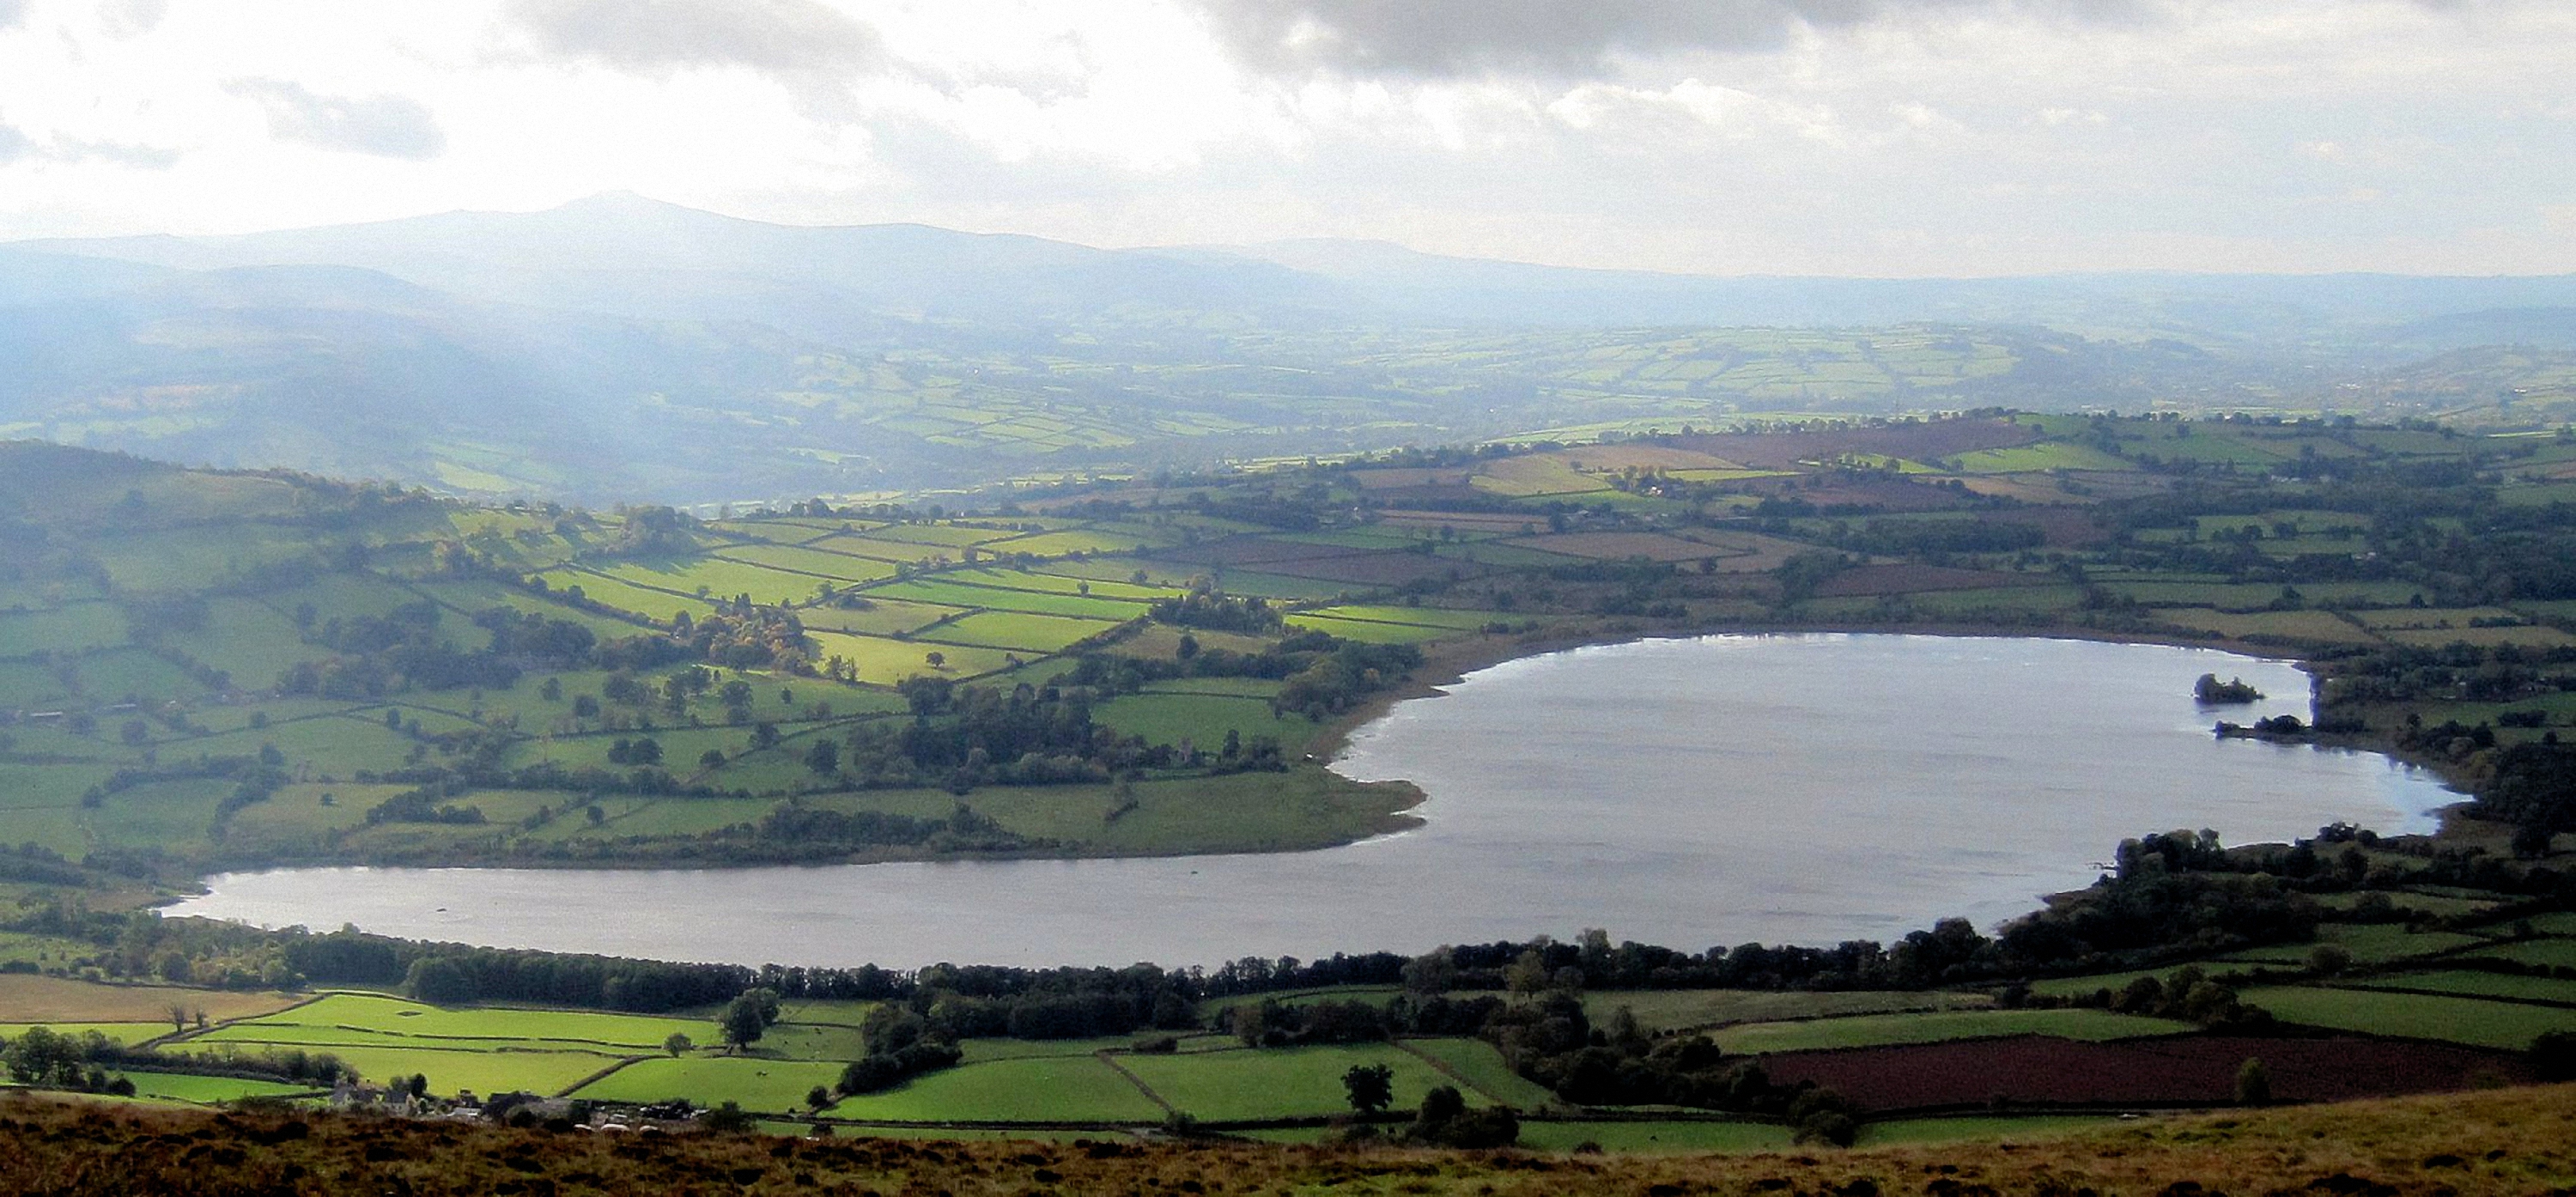 Looking down at Llangorse lake, Saturday lunch stop, Photo by Marian Parsons